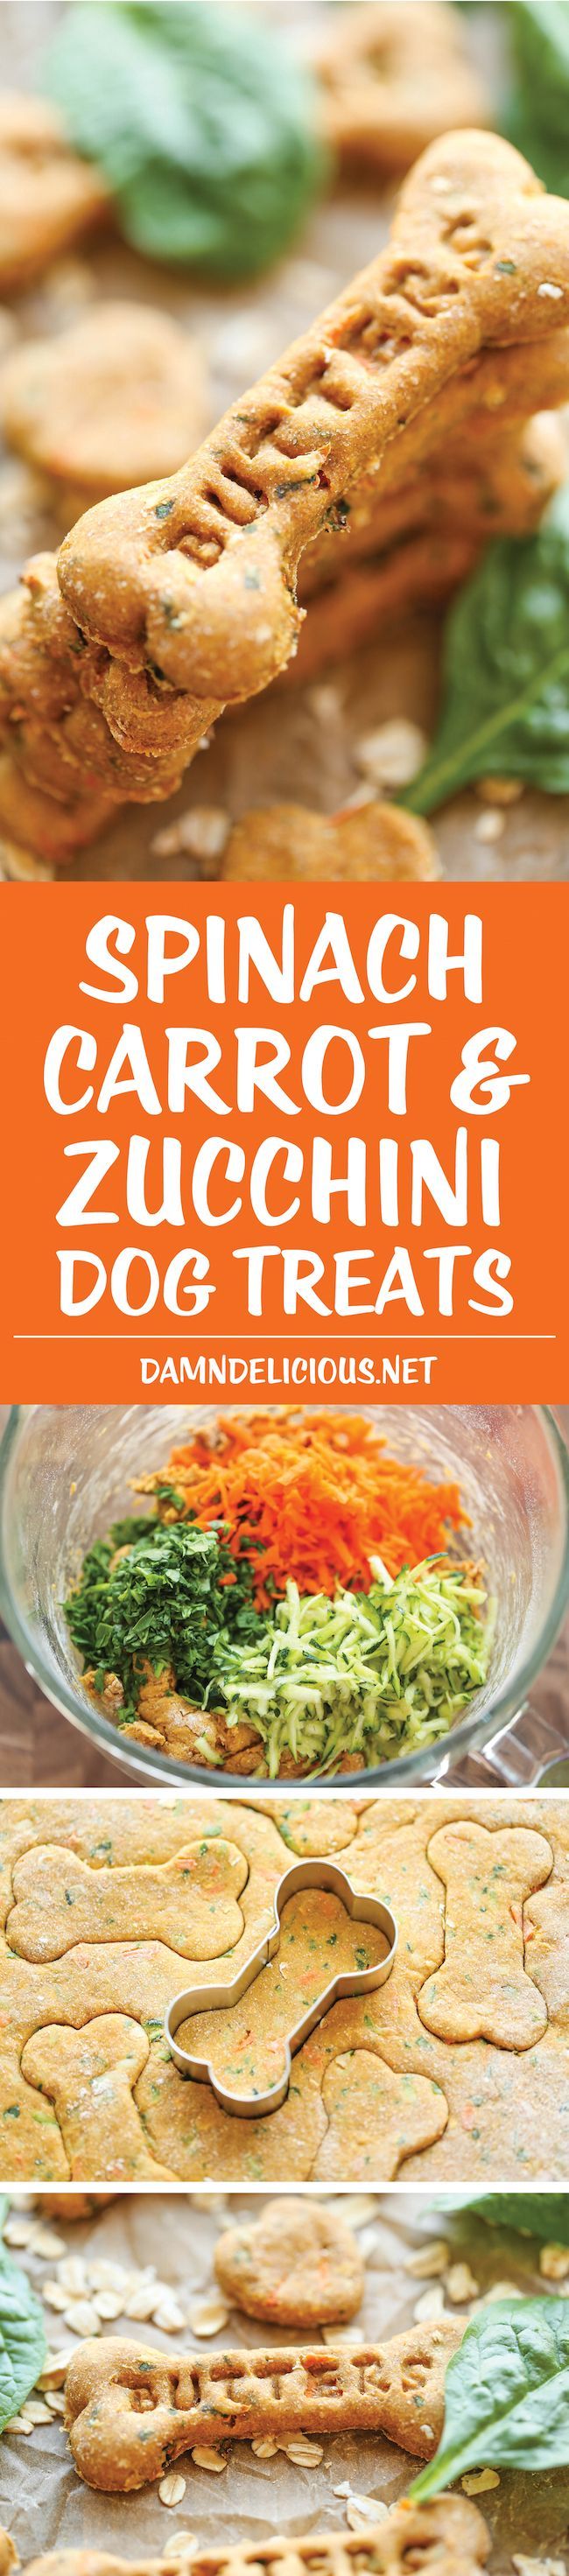 Spinach, Carrot and Zucchini Dog Treats – DIY dog treats that are nutritious, healthy and so easy to make. Plus, your pup will